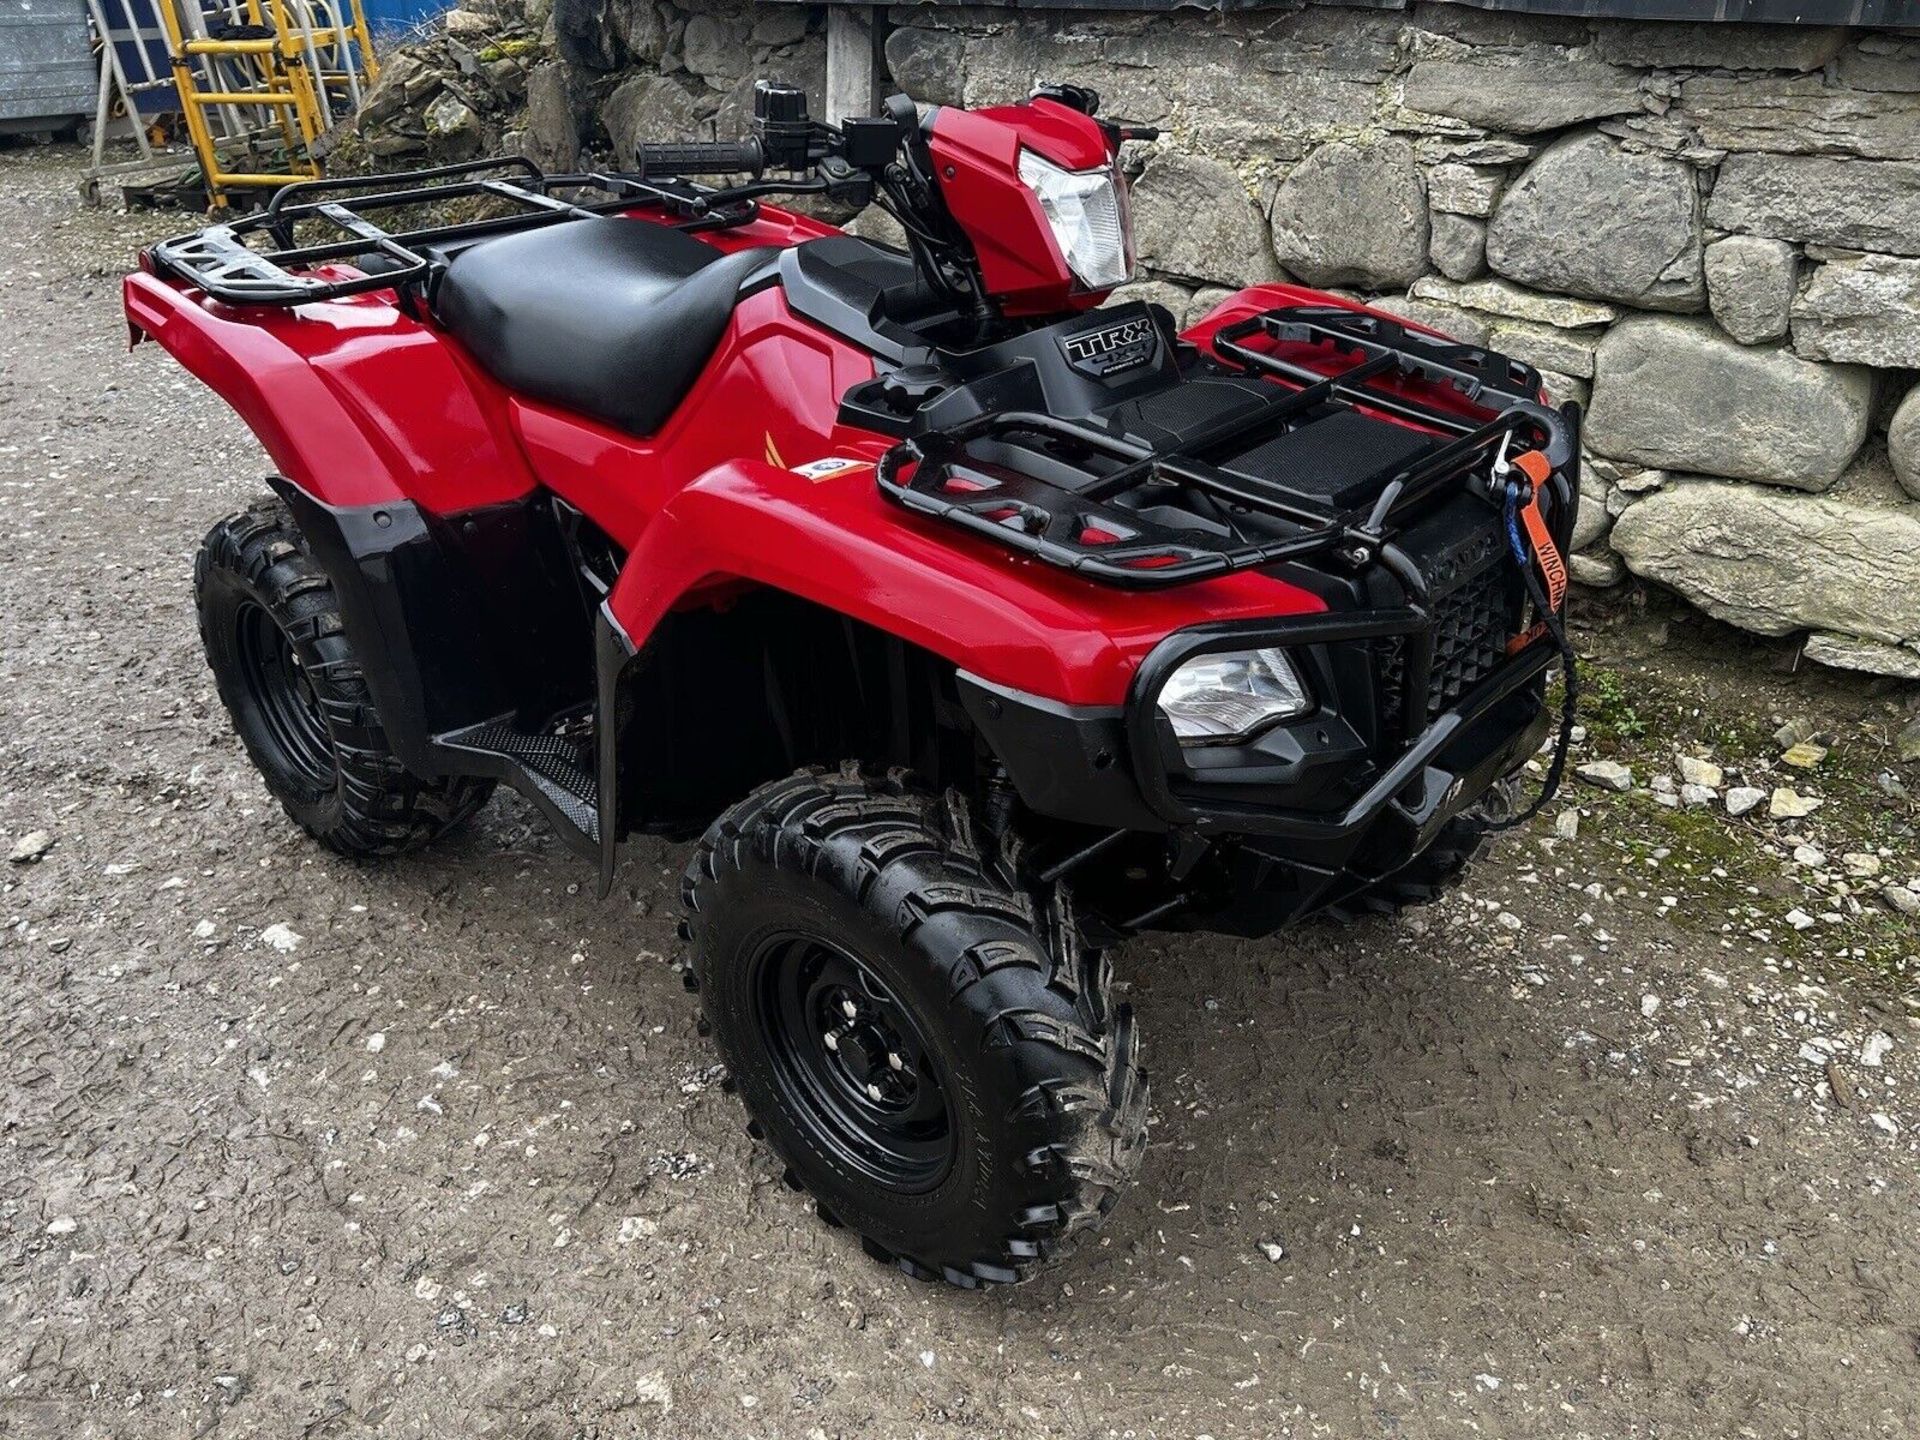 EPS PIONEER: HONDA TRX 500 FE QUAD WITH ELECTRIC POWER STEERING - Image 3 of 8